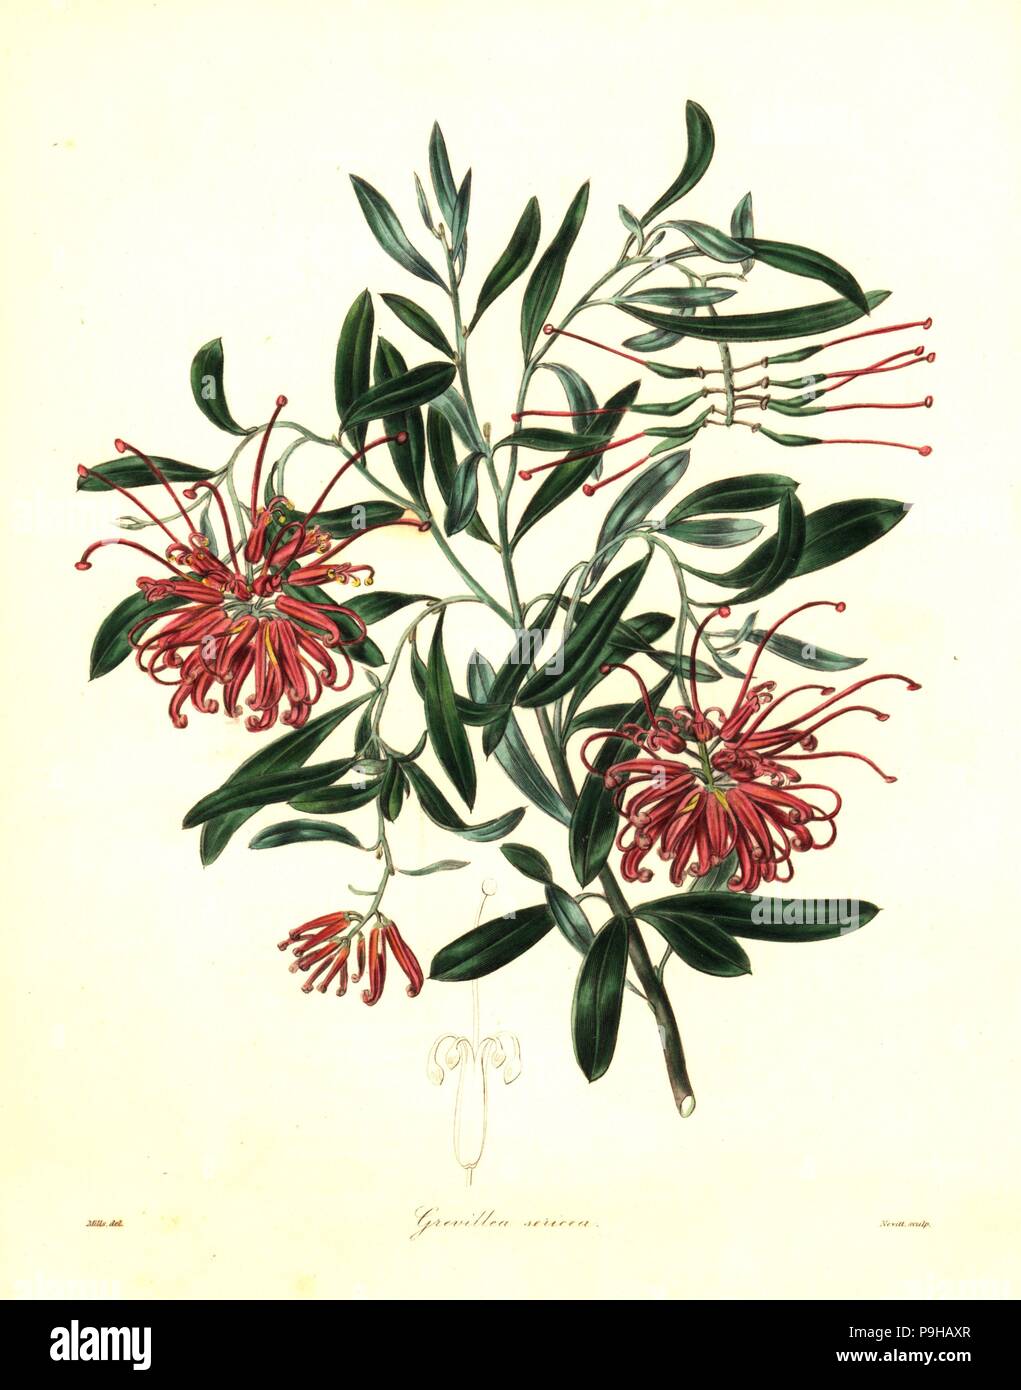 Pink spider flower or silky grevillea, Grevillea sericea. Australia. Handcoloured copperplate engraving by S. Nevitt after a botanical illustration by Mills from Benjamin Maund and the Rev. John Stevens Henslow's The Botanist, London, 1836. Stock Photo